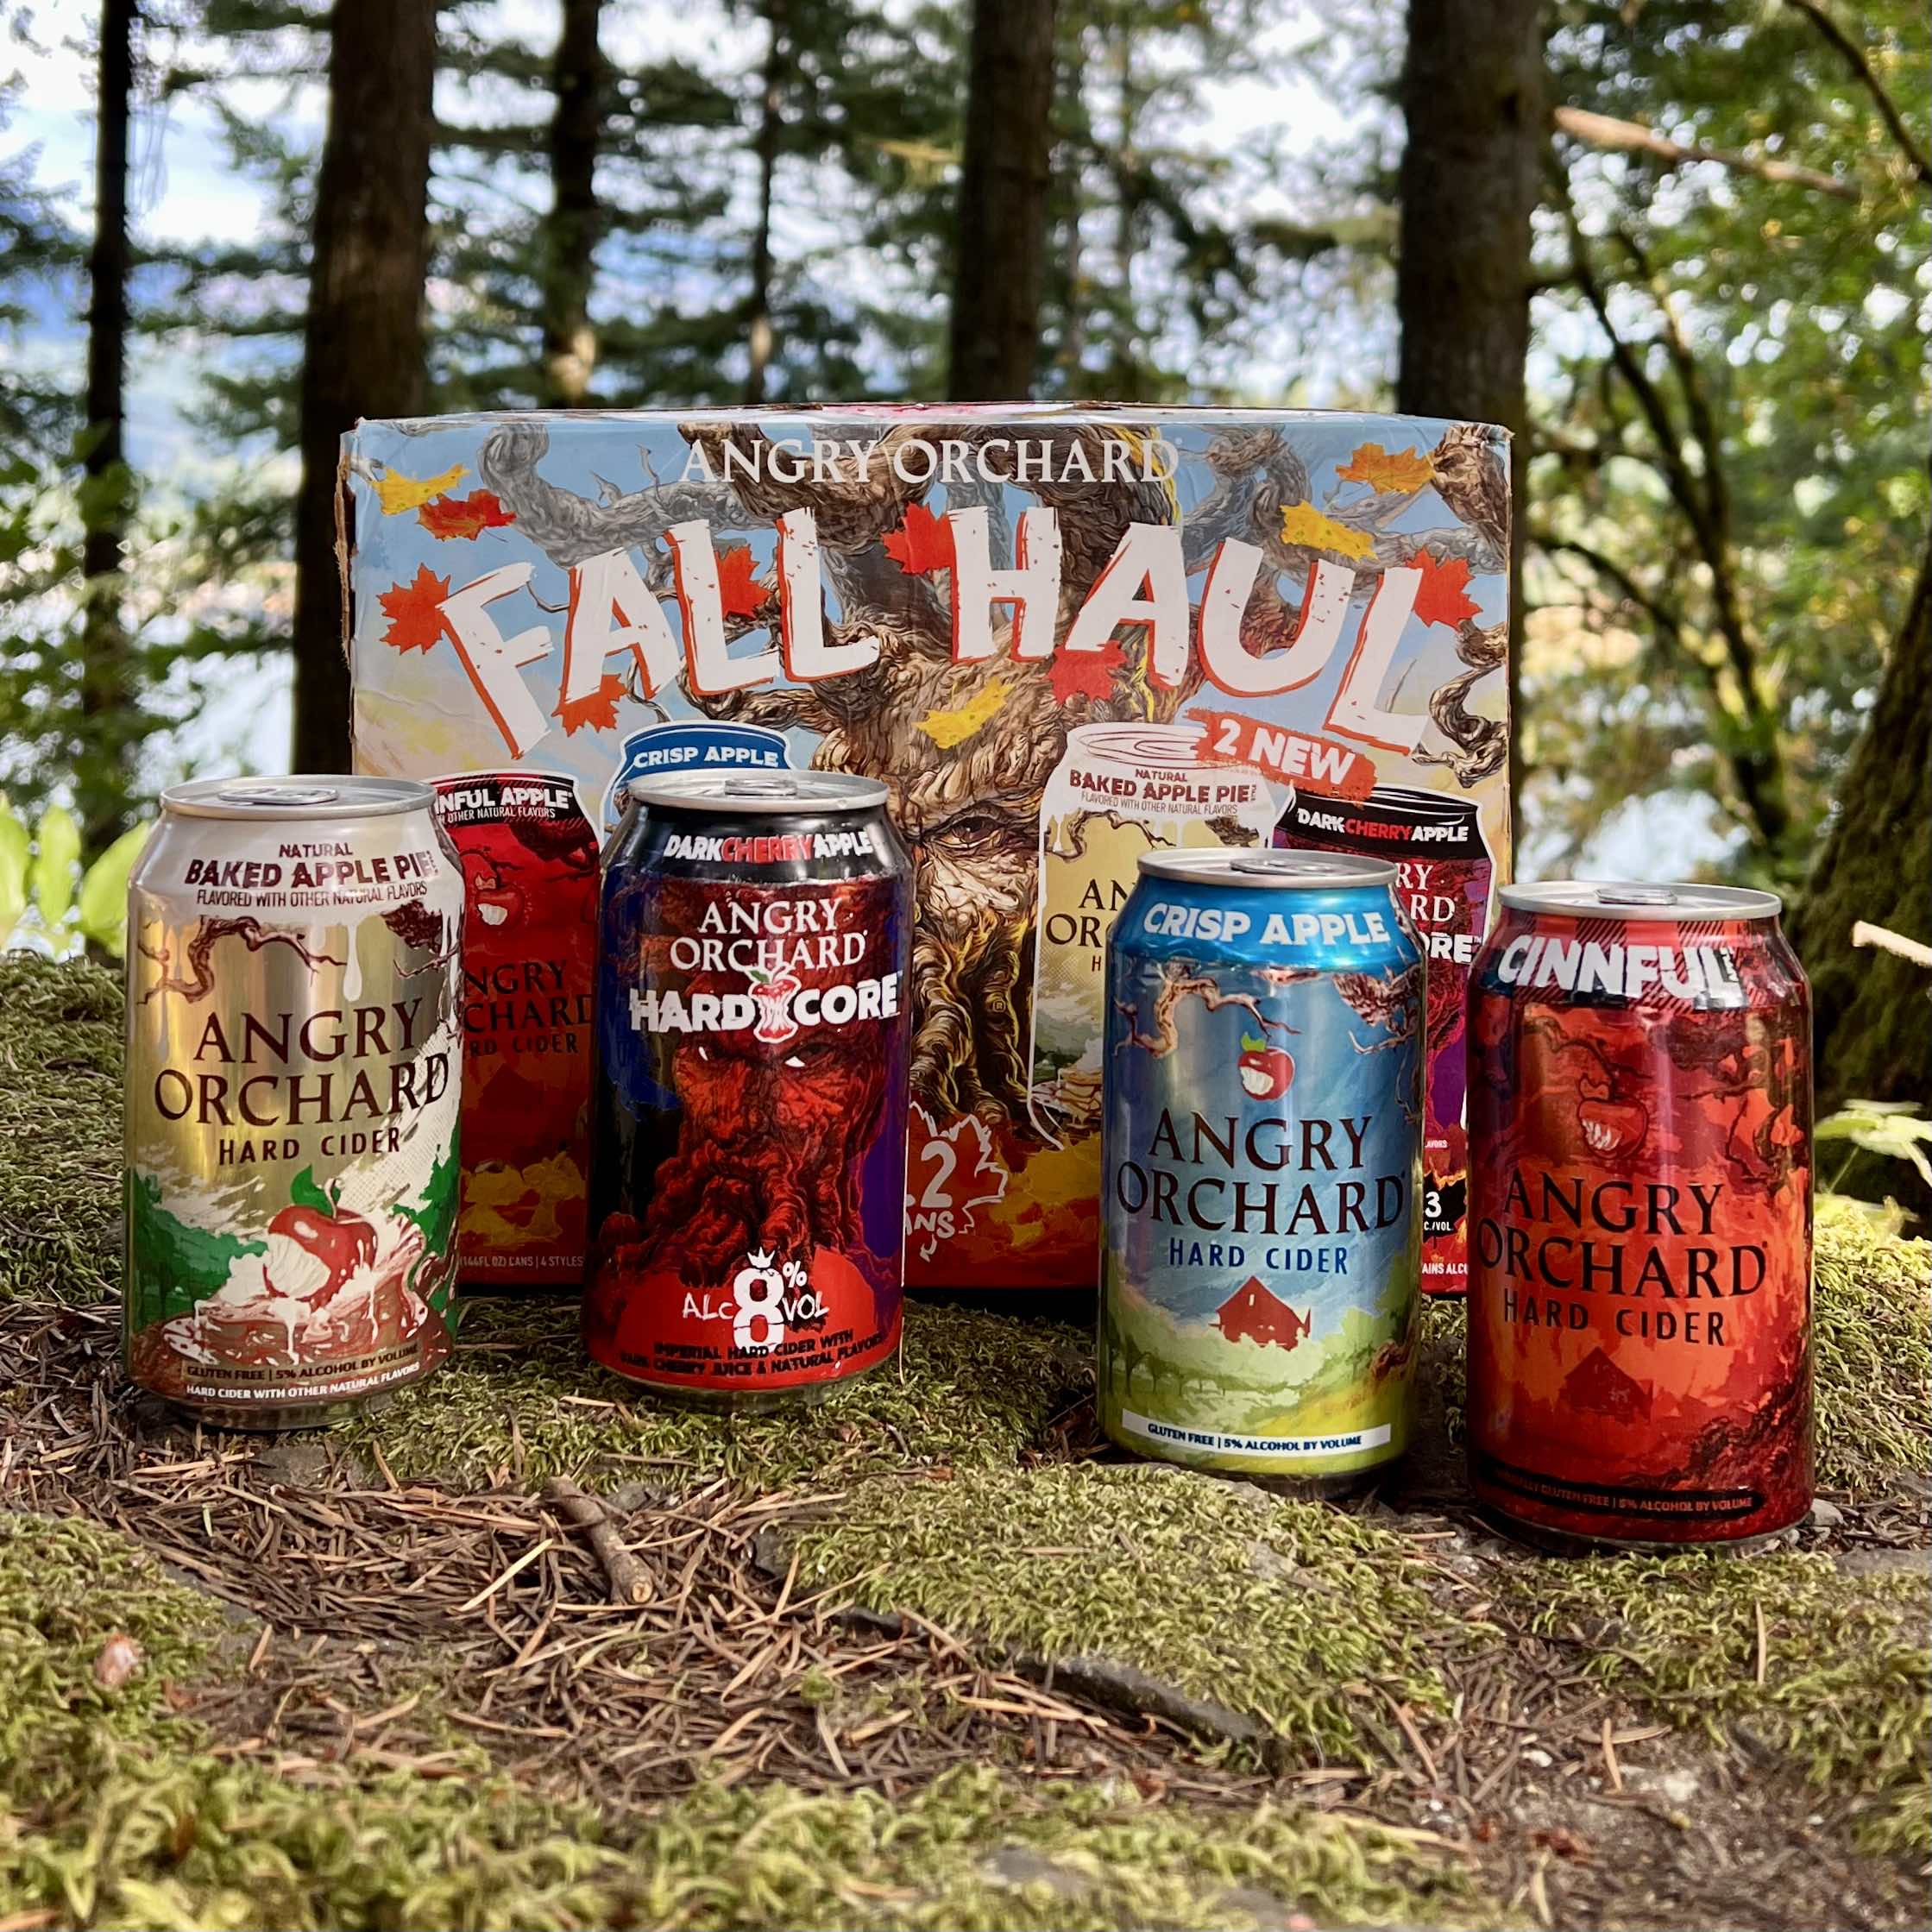 Angry Orchard's new 2022 Fall Haul Variety Pack